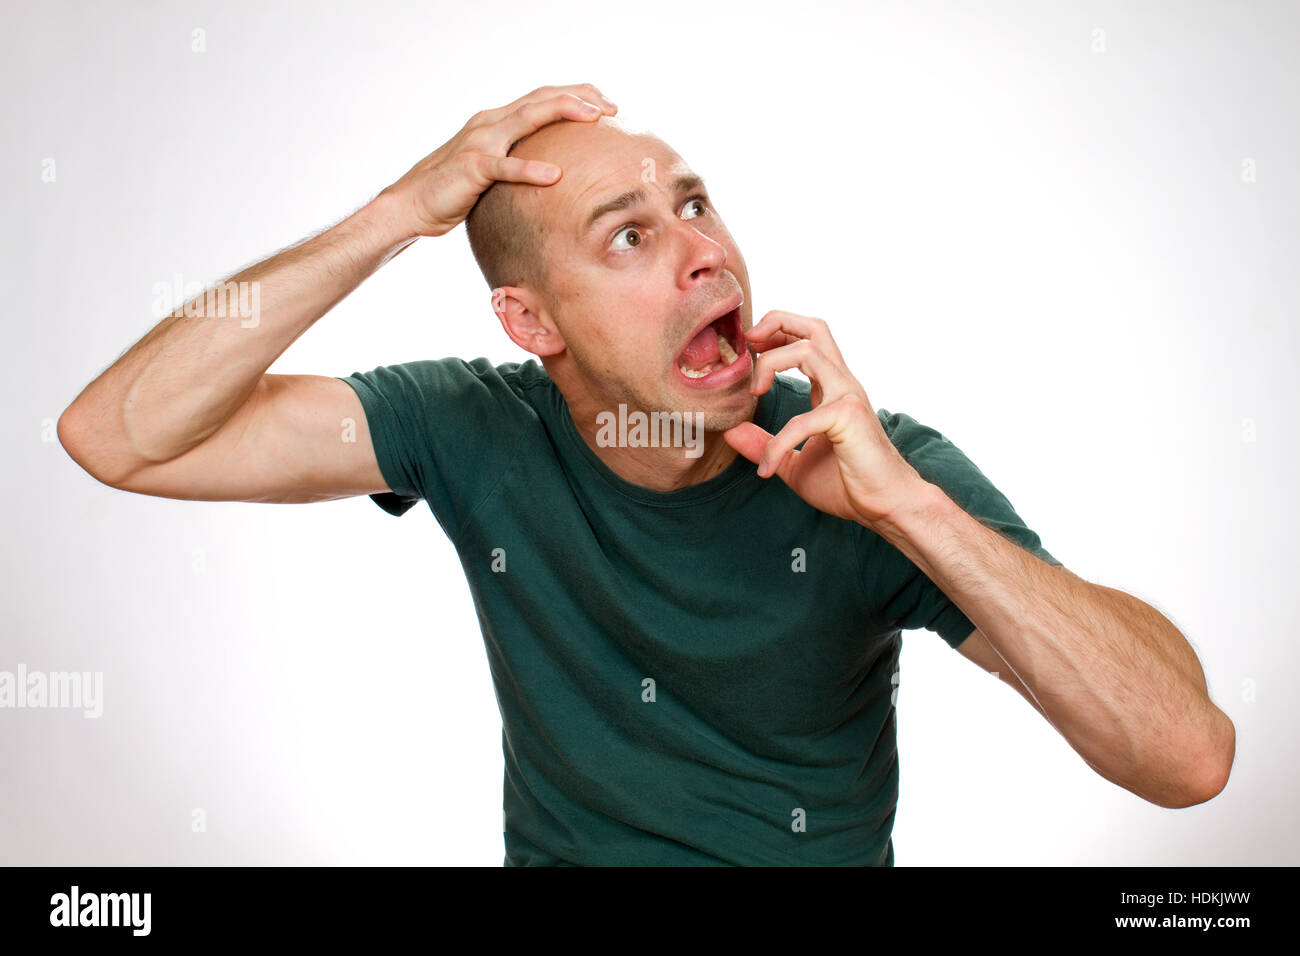 Comical man expresses fear in a funny pose. Stock Photo